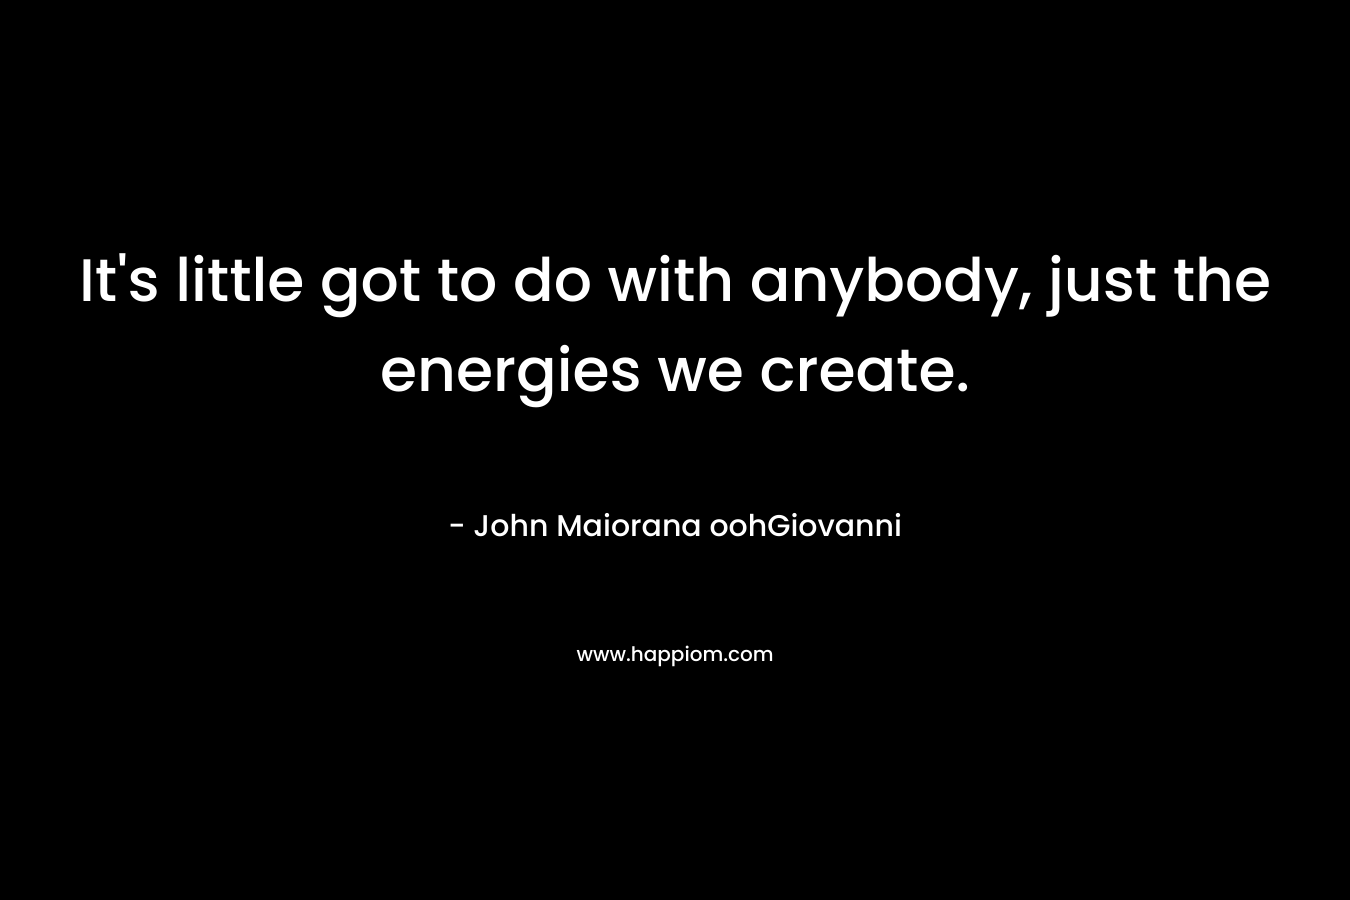 It's little got to do with anybody, just the energies we create.